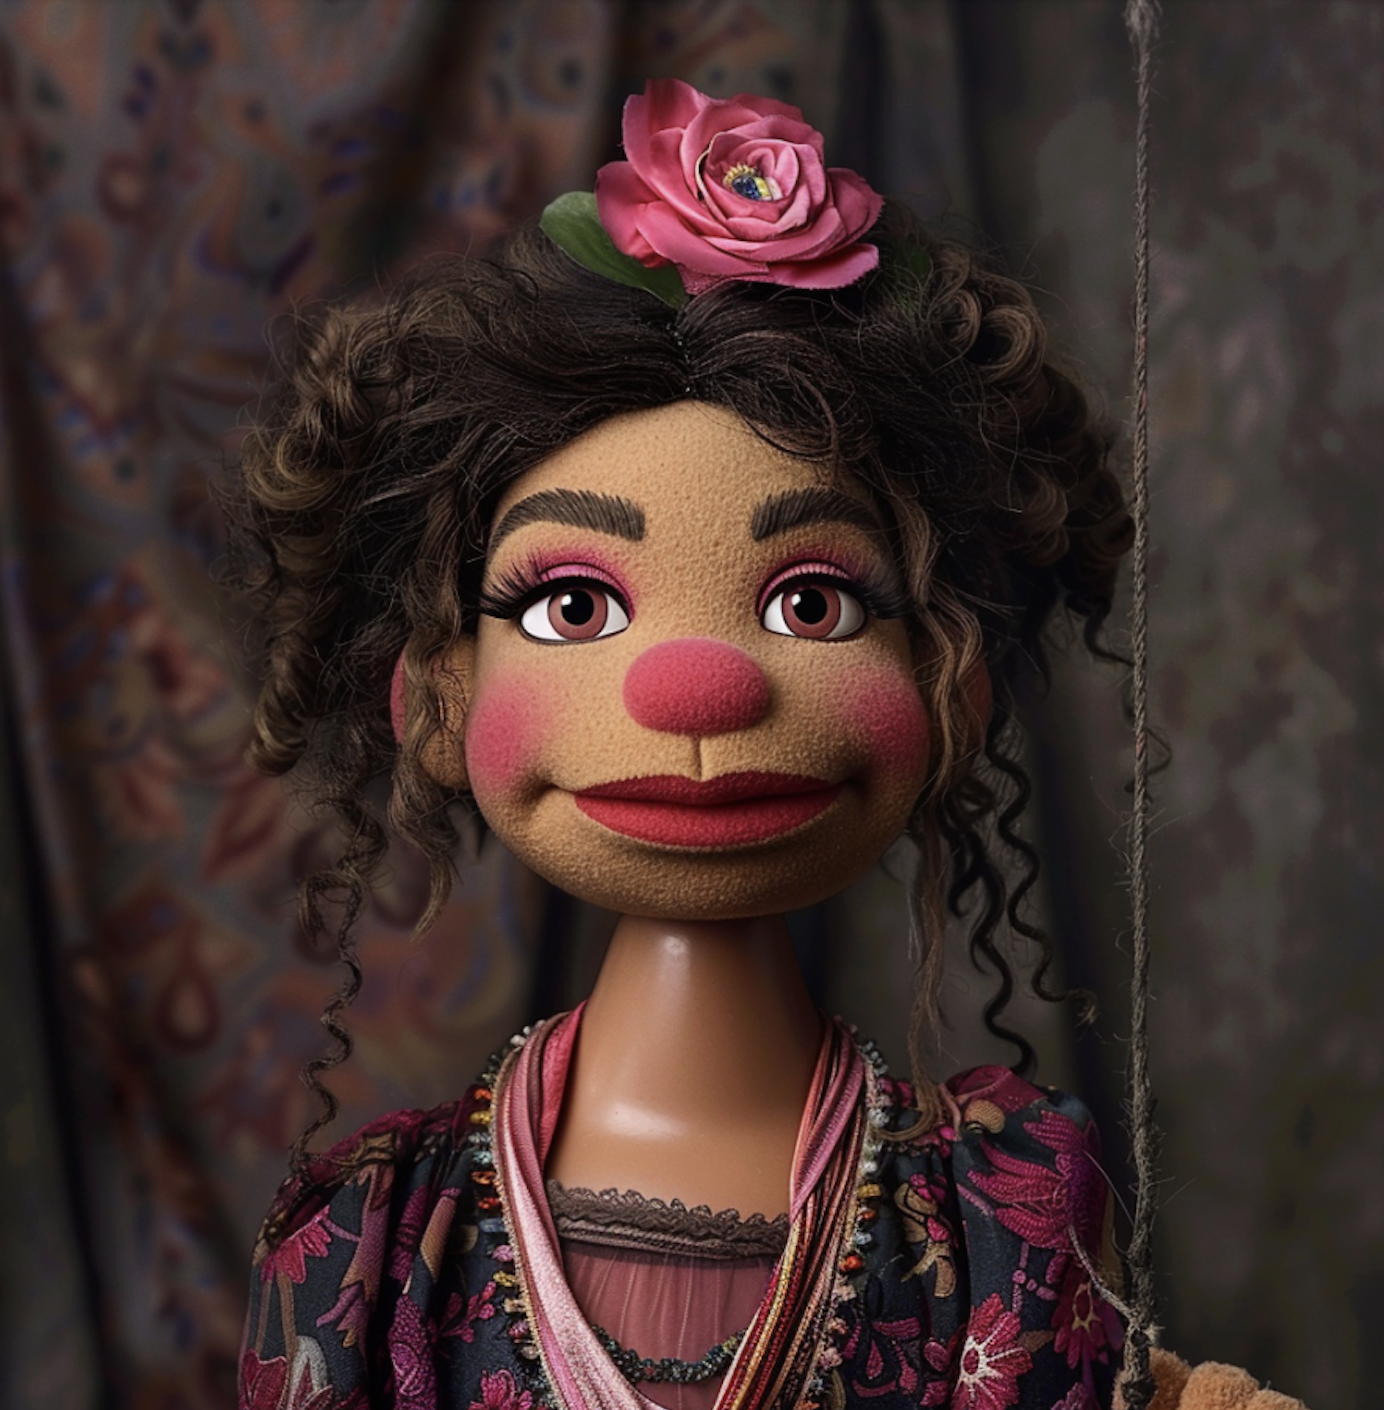 A muppet with curly tendrils, makeup, and a floral adornment, wearing a patterned dress with a lace collar